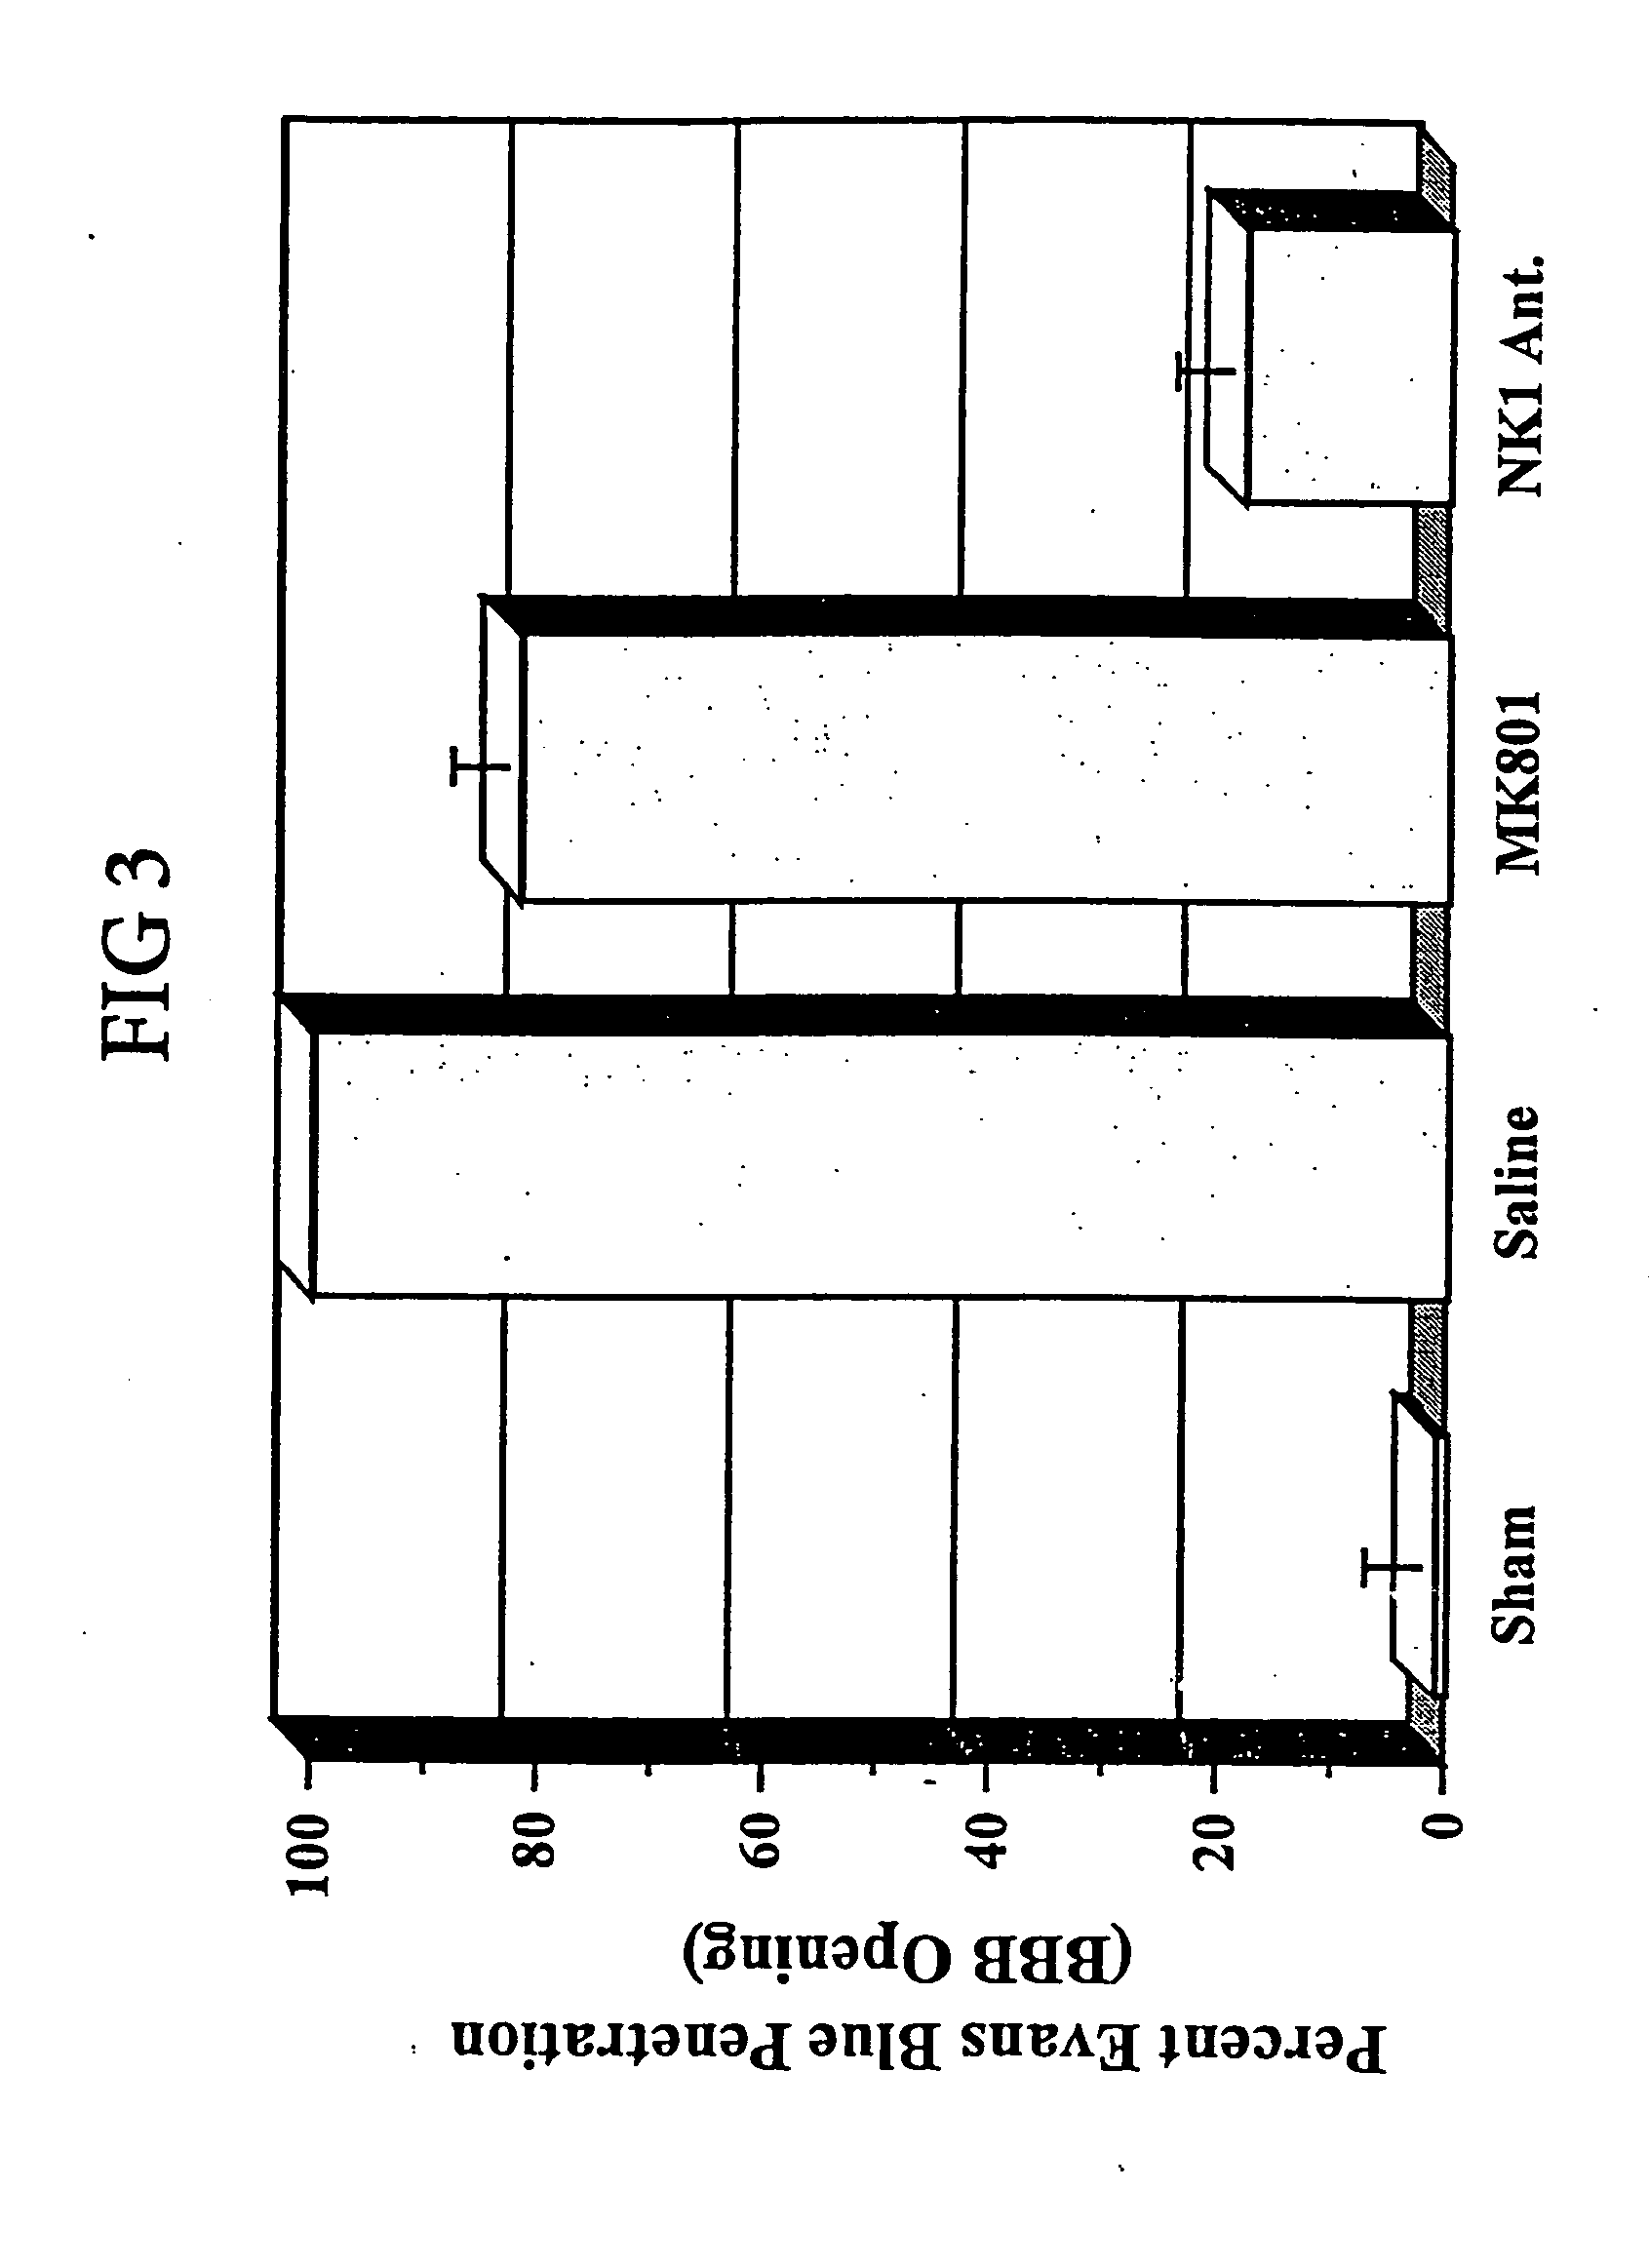 Method of treatment and/or prevention of brain, spinal or nerve injury